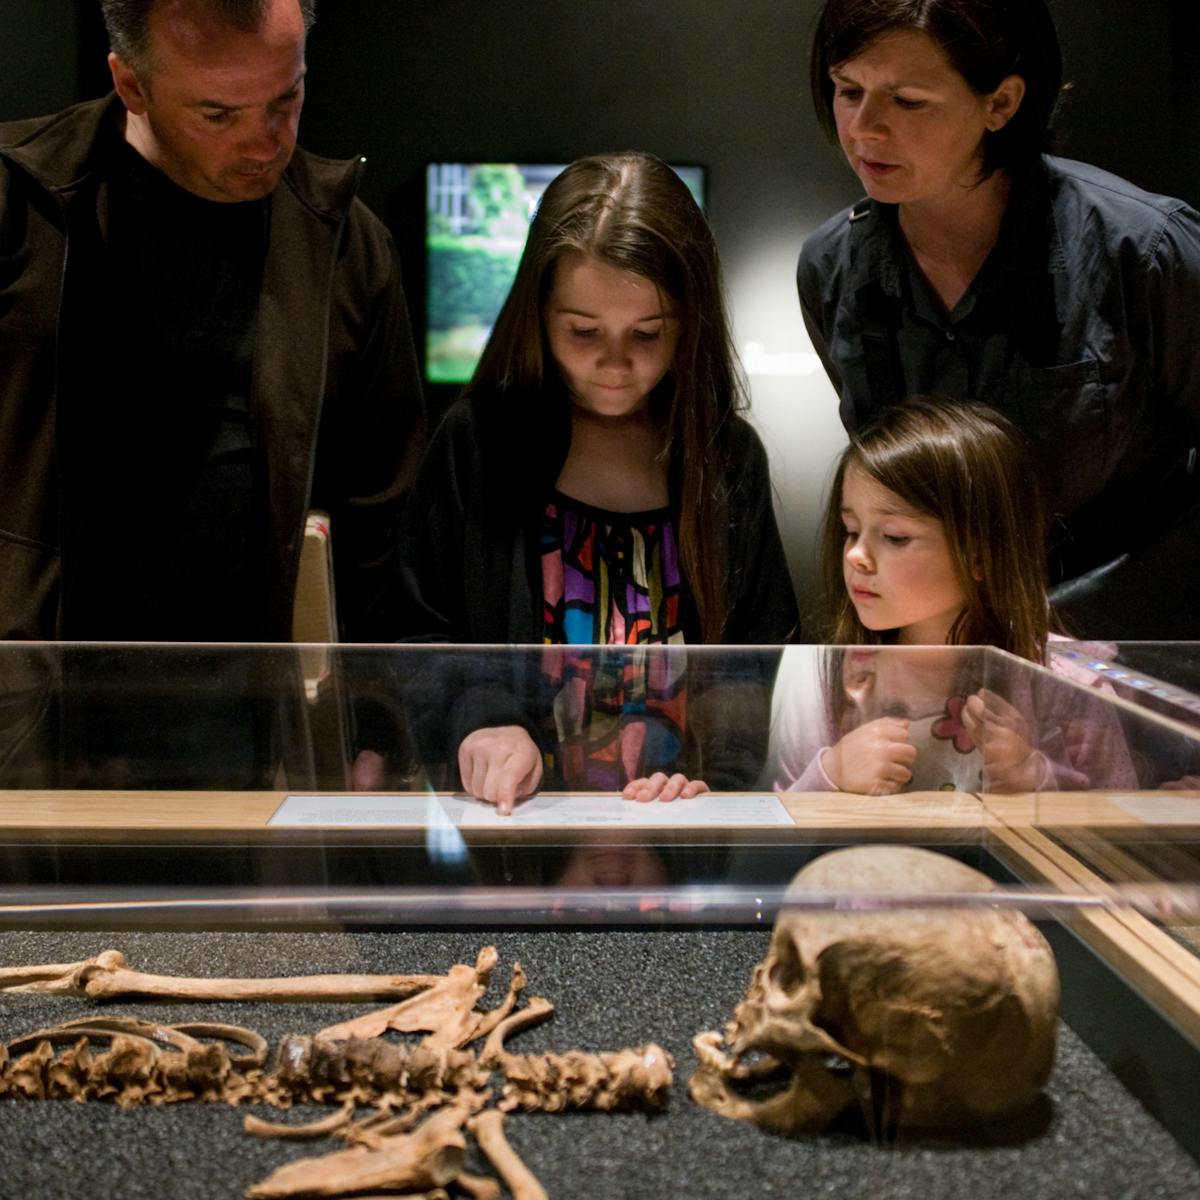 Photograph of a family looking at a display case showing one of the skeletons that formed part of the Skeletons: London’s Buried Bones exhibition at Wellcome Collection.